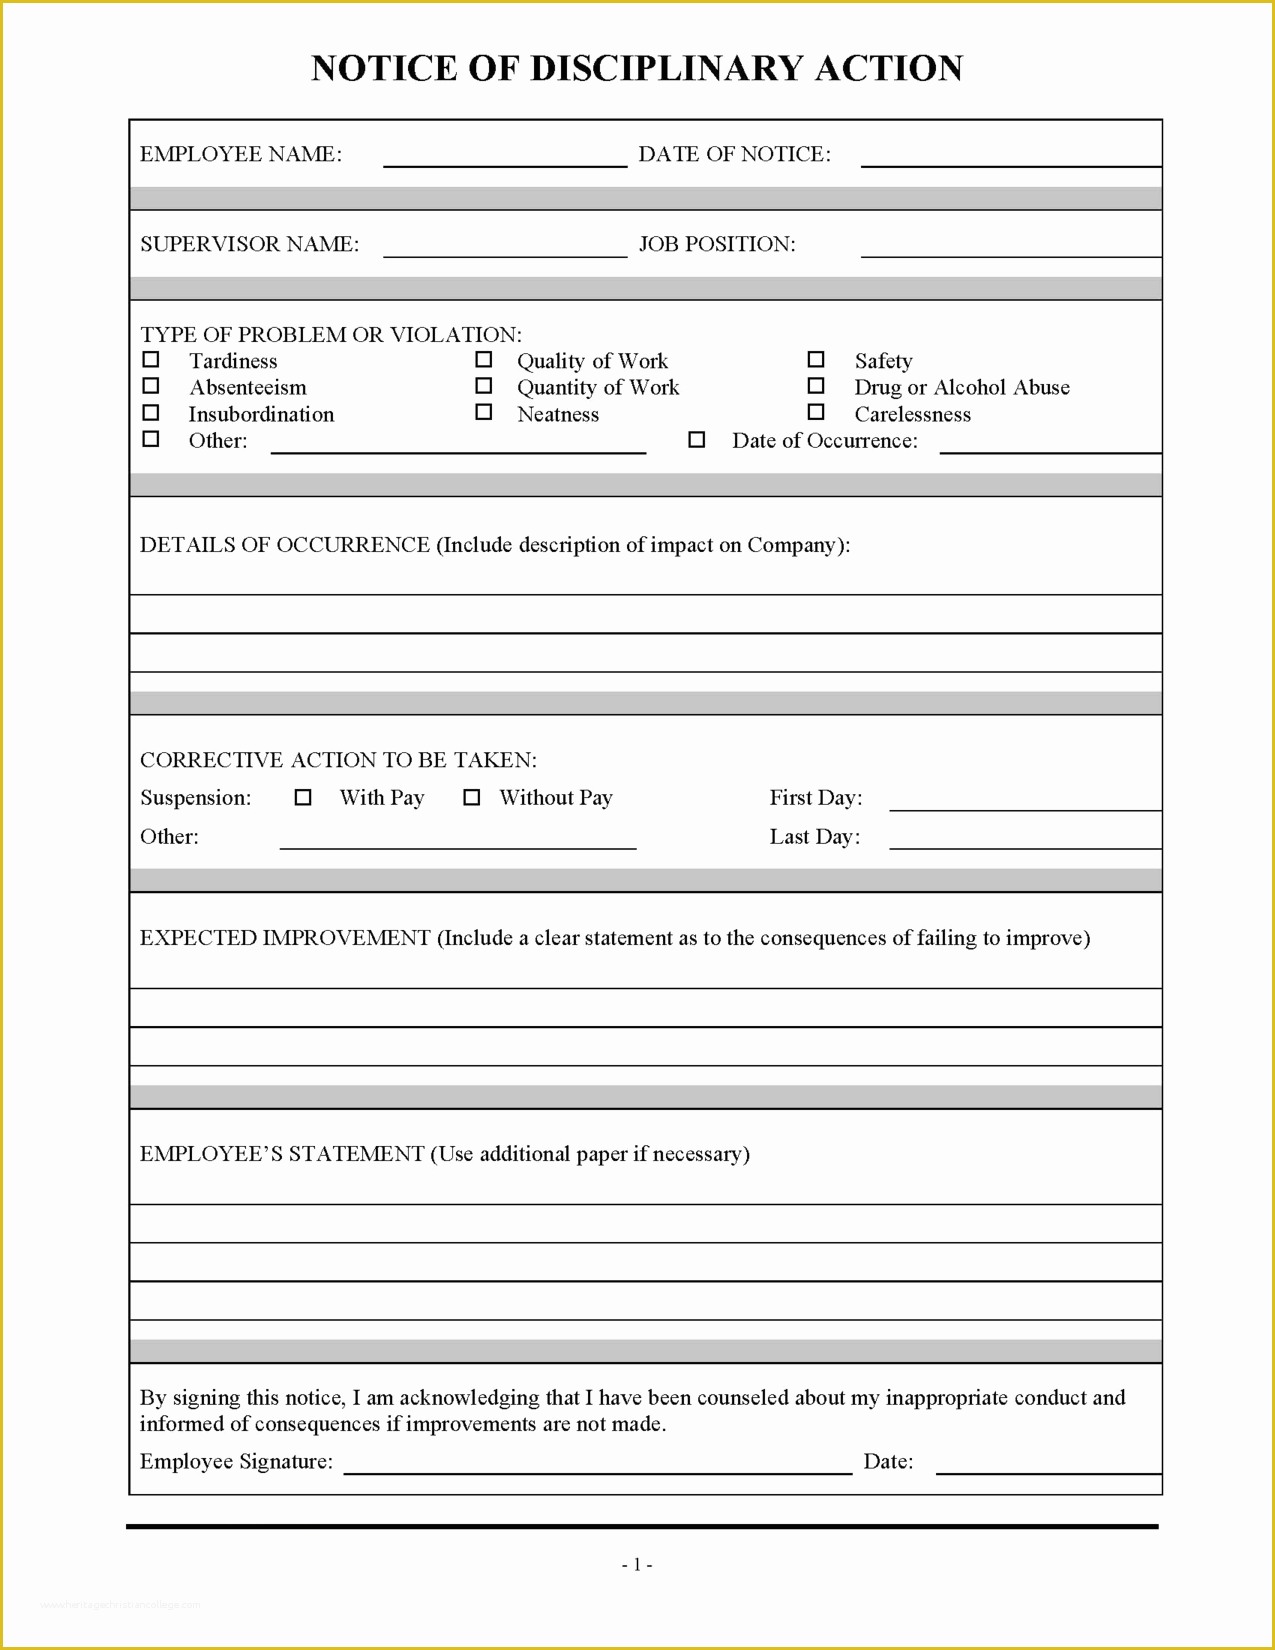 Hr Documents Templates Free Of Employee Employee Disciplinary Action